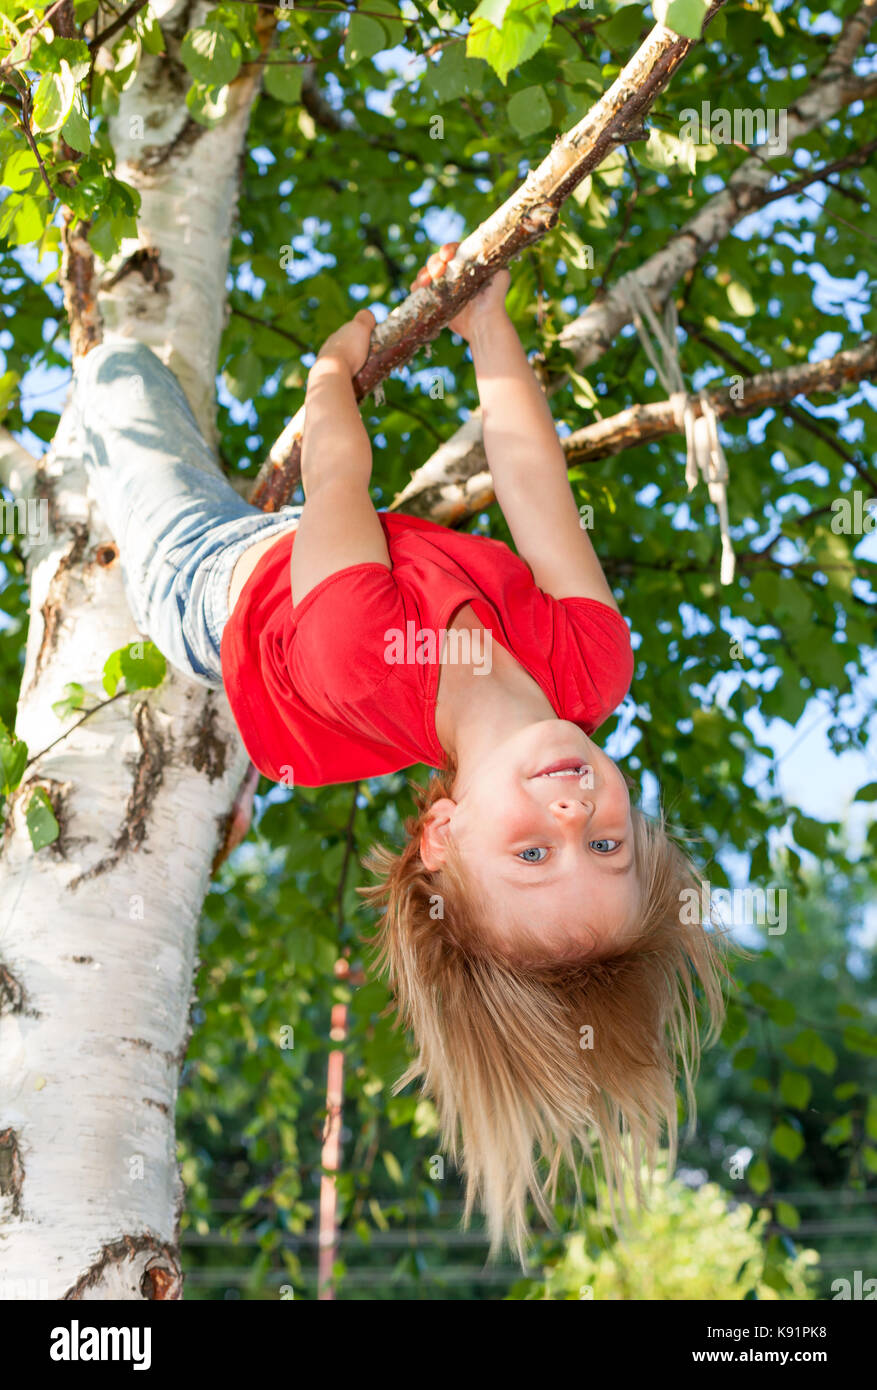 Low angle view of happy girl wearing red t-shirt hanging upside down from a birch tree looking at camera enjoying summertime Stock Photo